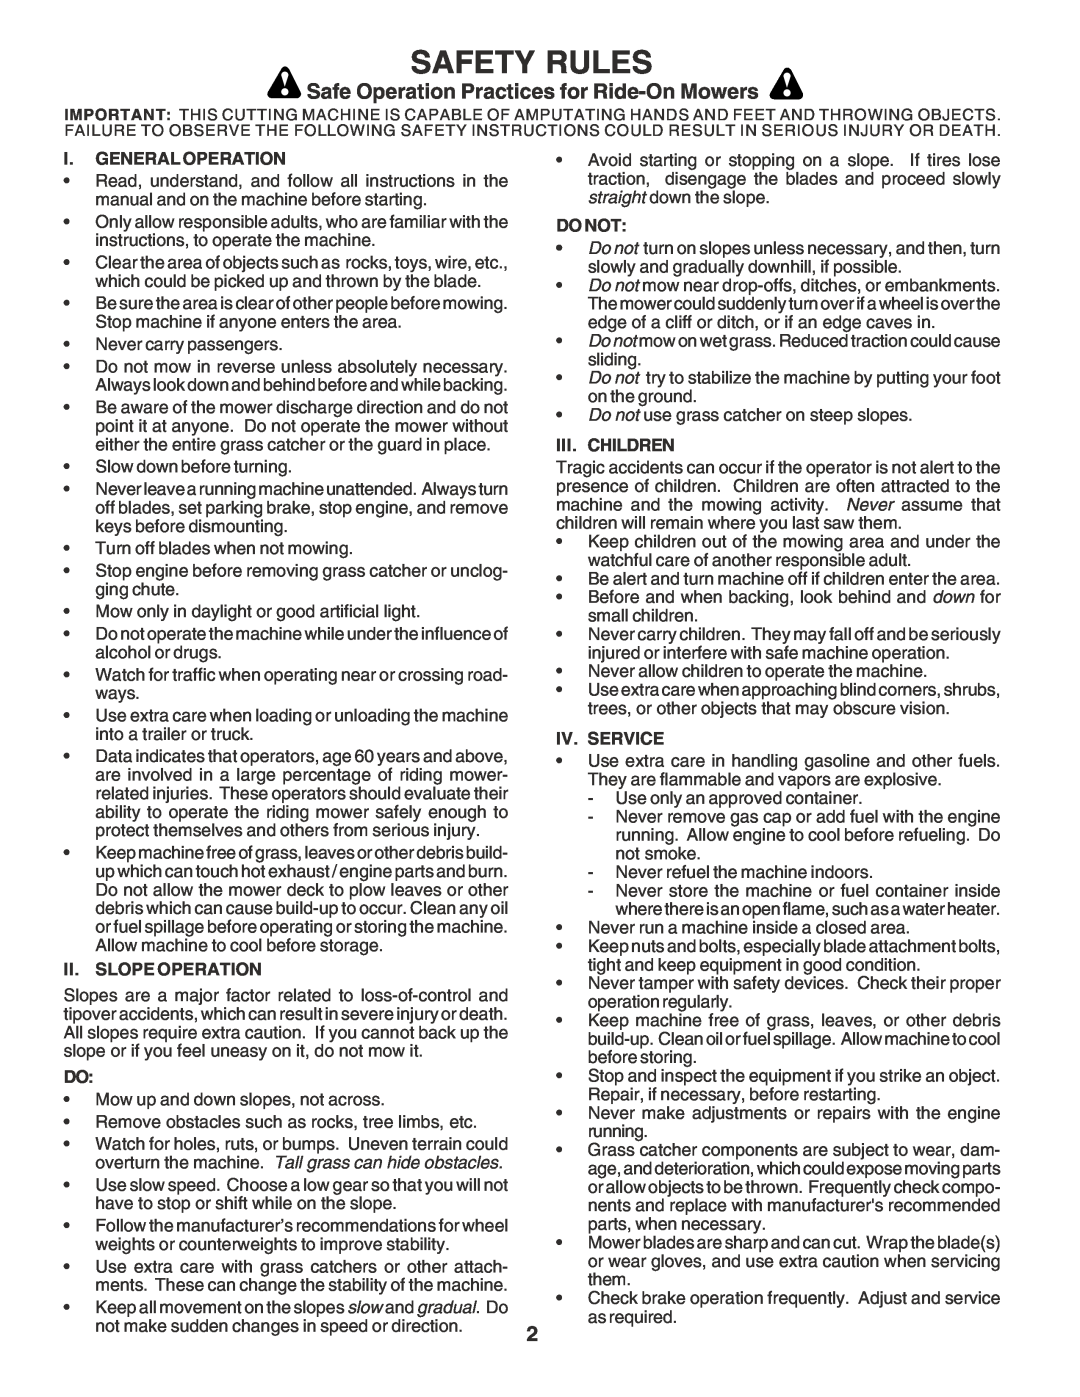 Poulan PR20PH42STB owner manual Safety Rules, Safe Operation Practices for Ride-On Mowers 